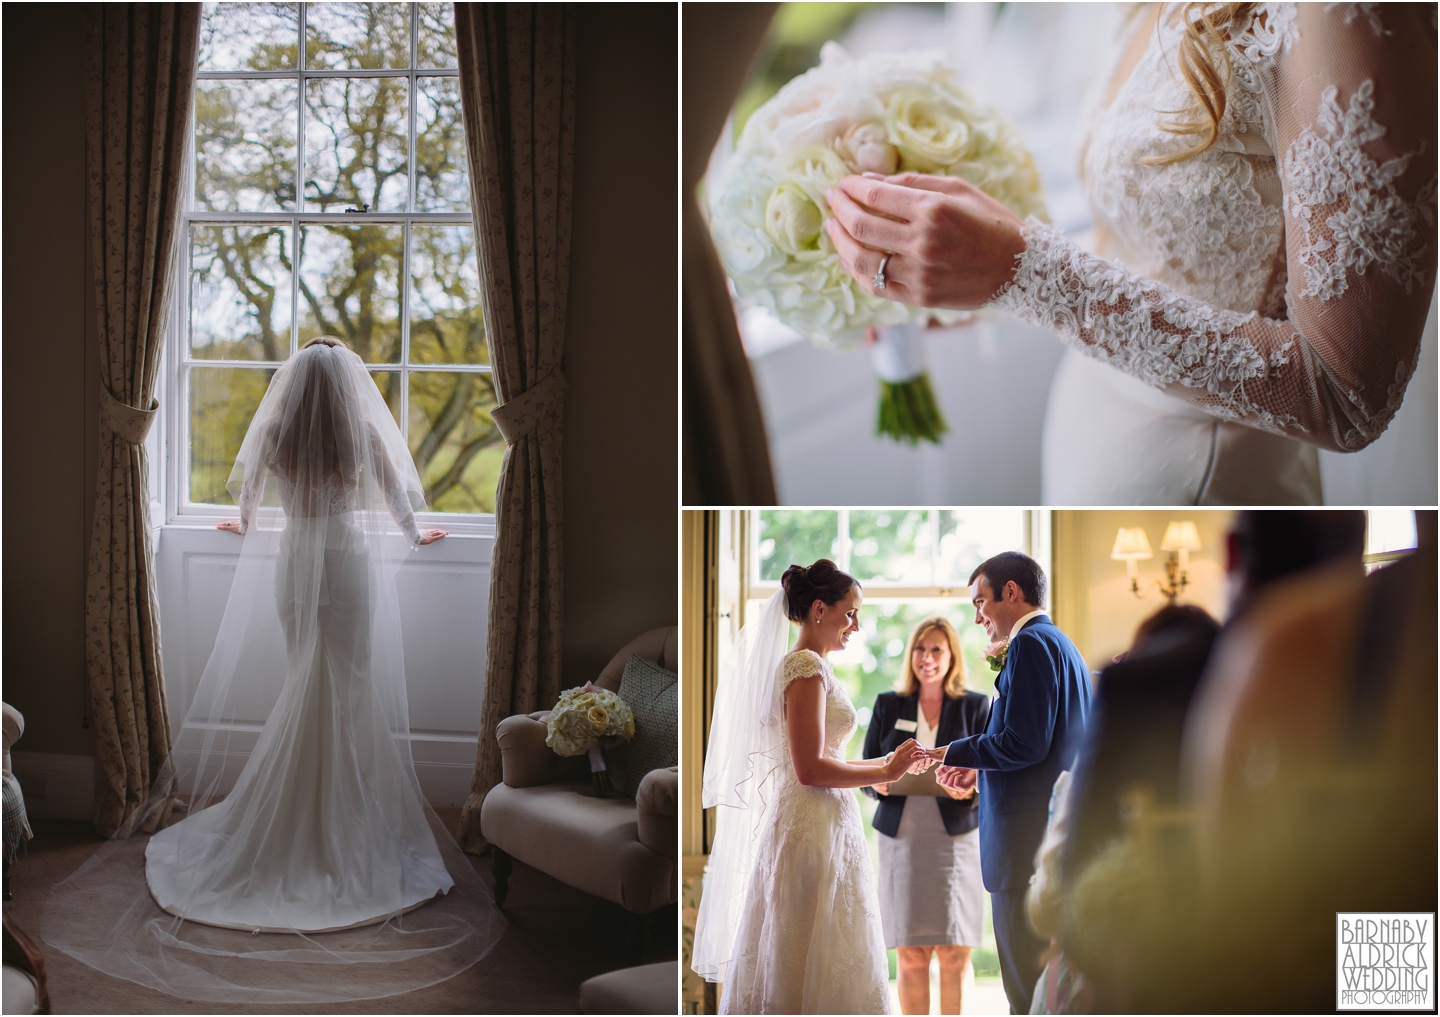 Photographs of a bride before the wedding ceremony at Middleton Lodge